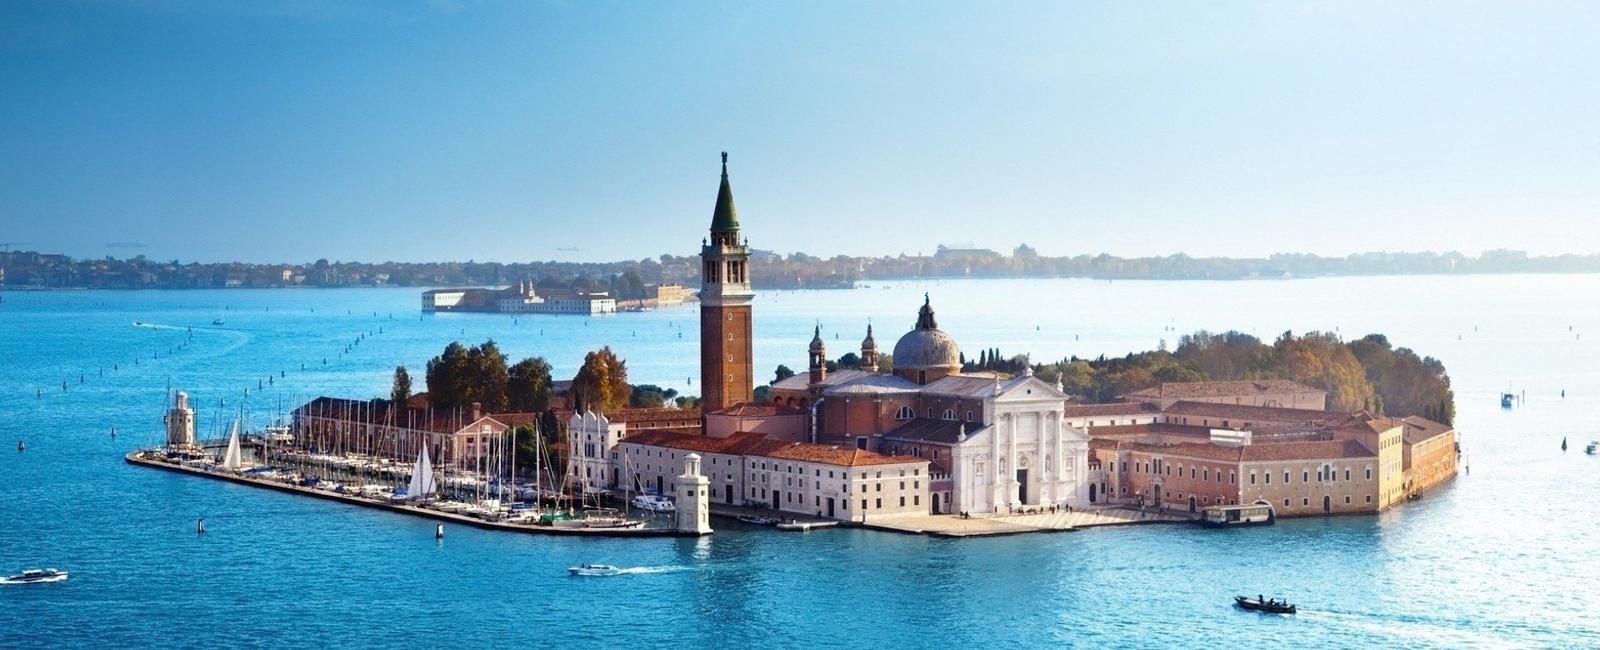 The city of venice stands on about 120 small islands